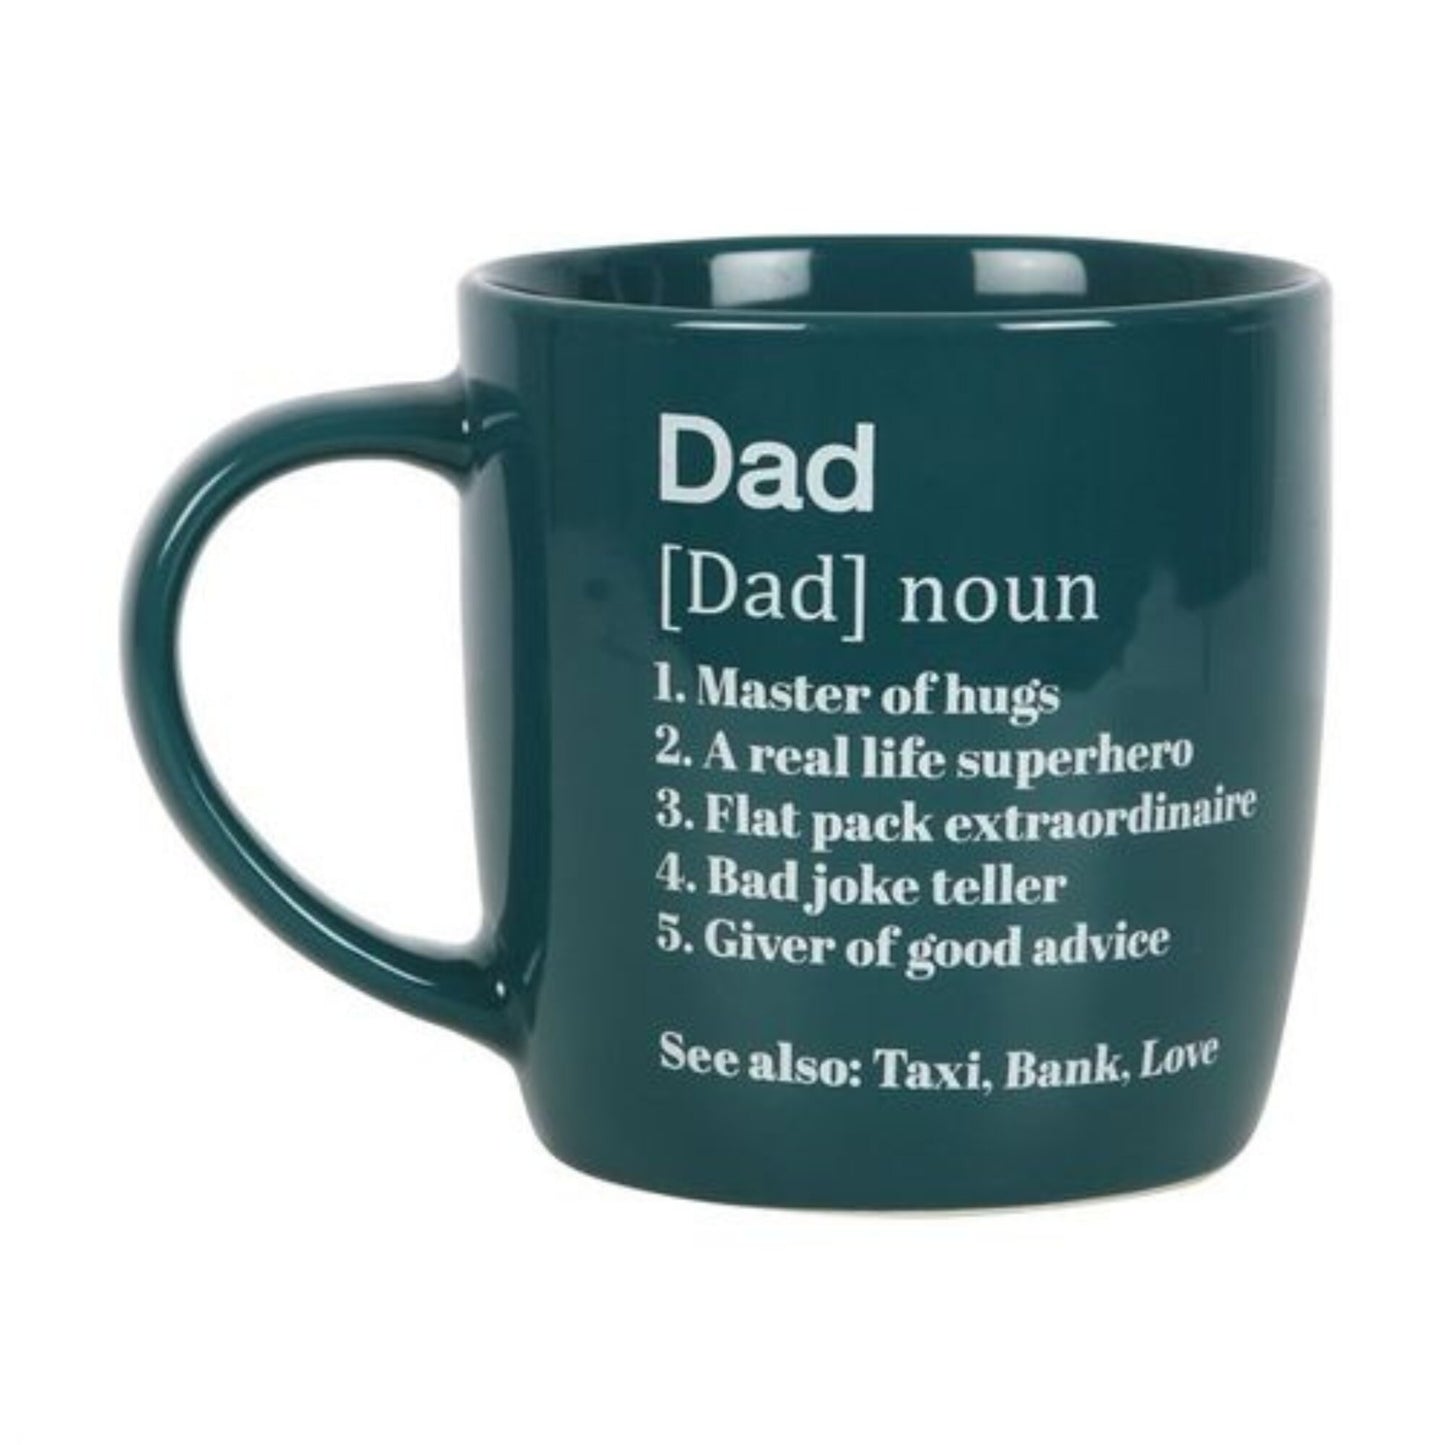 Dad Definition Mug, Fathers Day Gift, Present For Dad, Birthday Gift For New Dad, First Time Daddy, Fun Cute Gift Idea